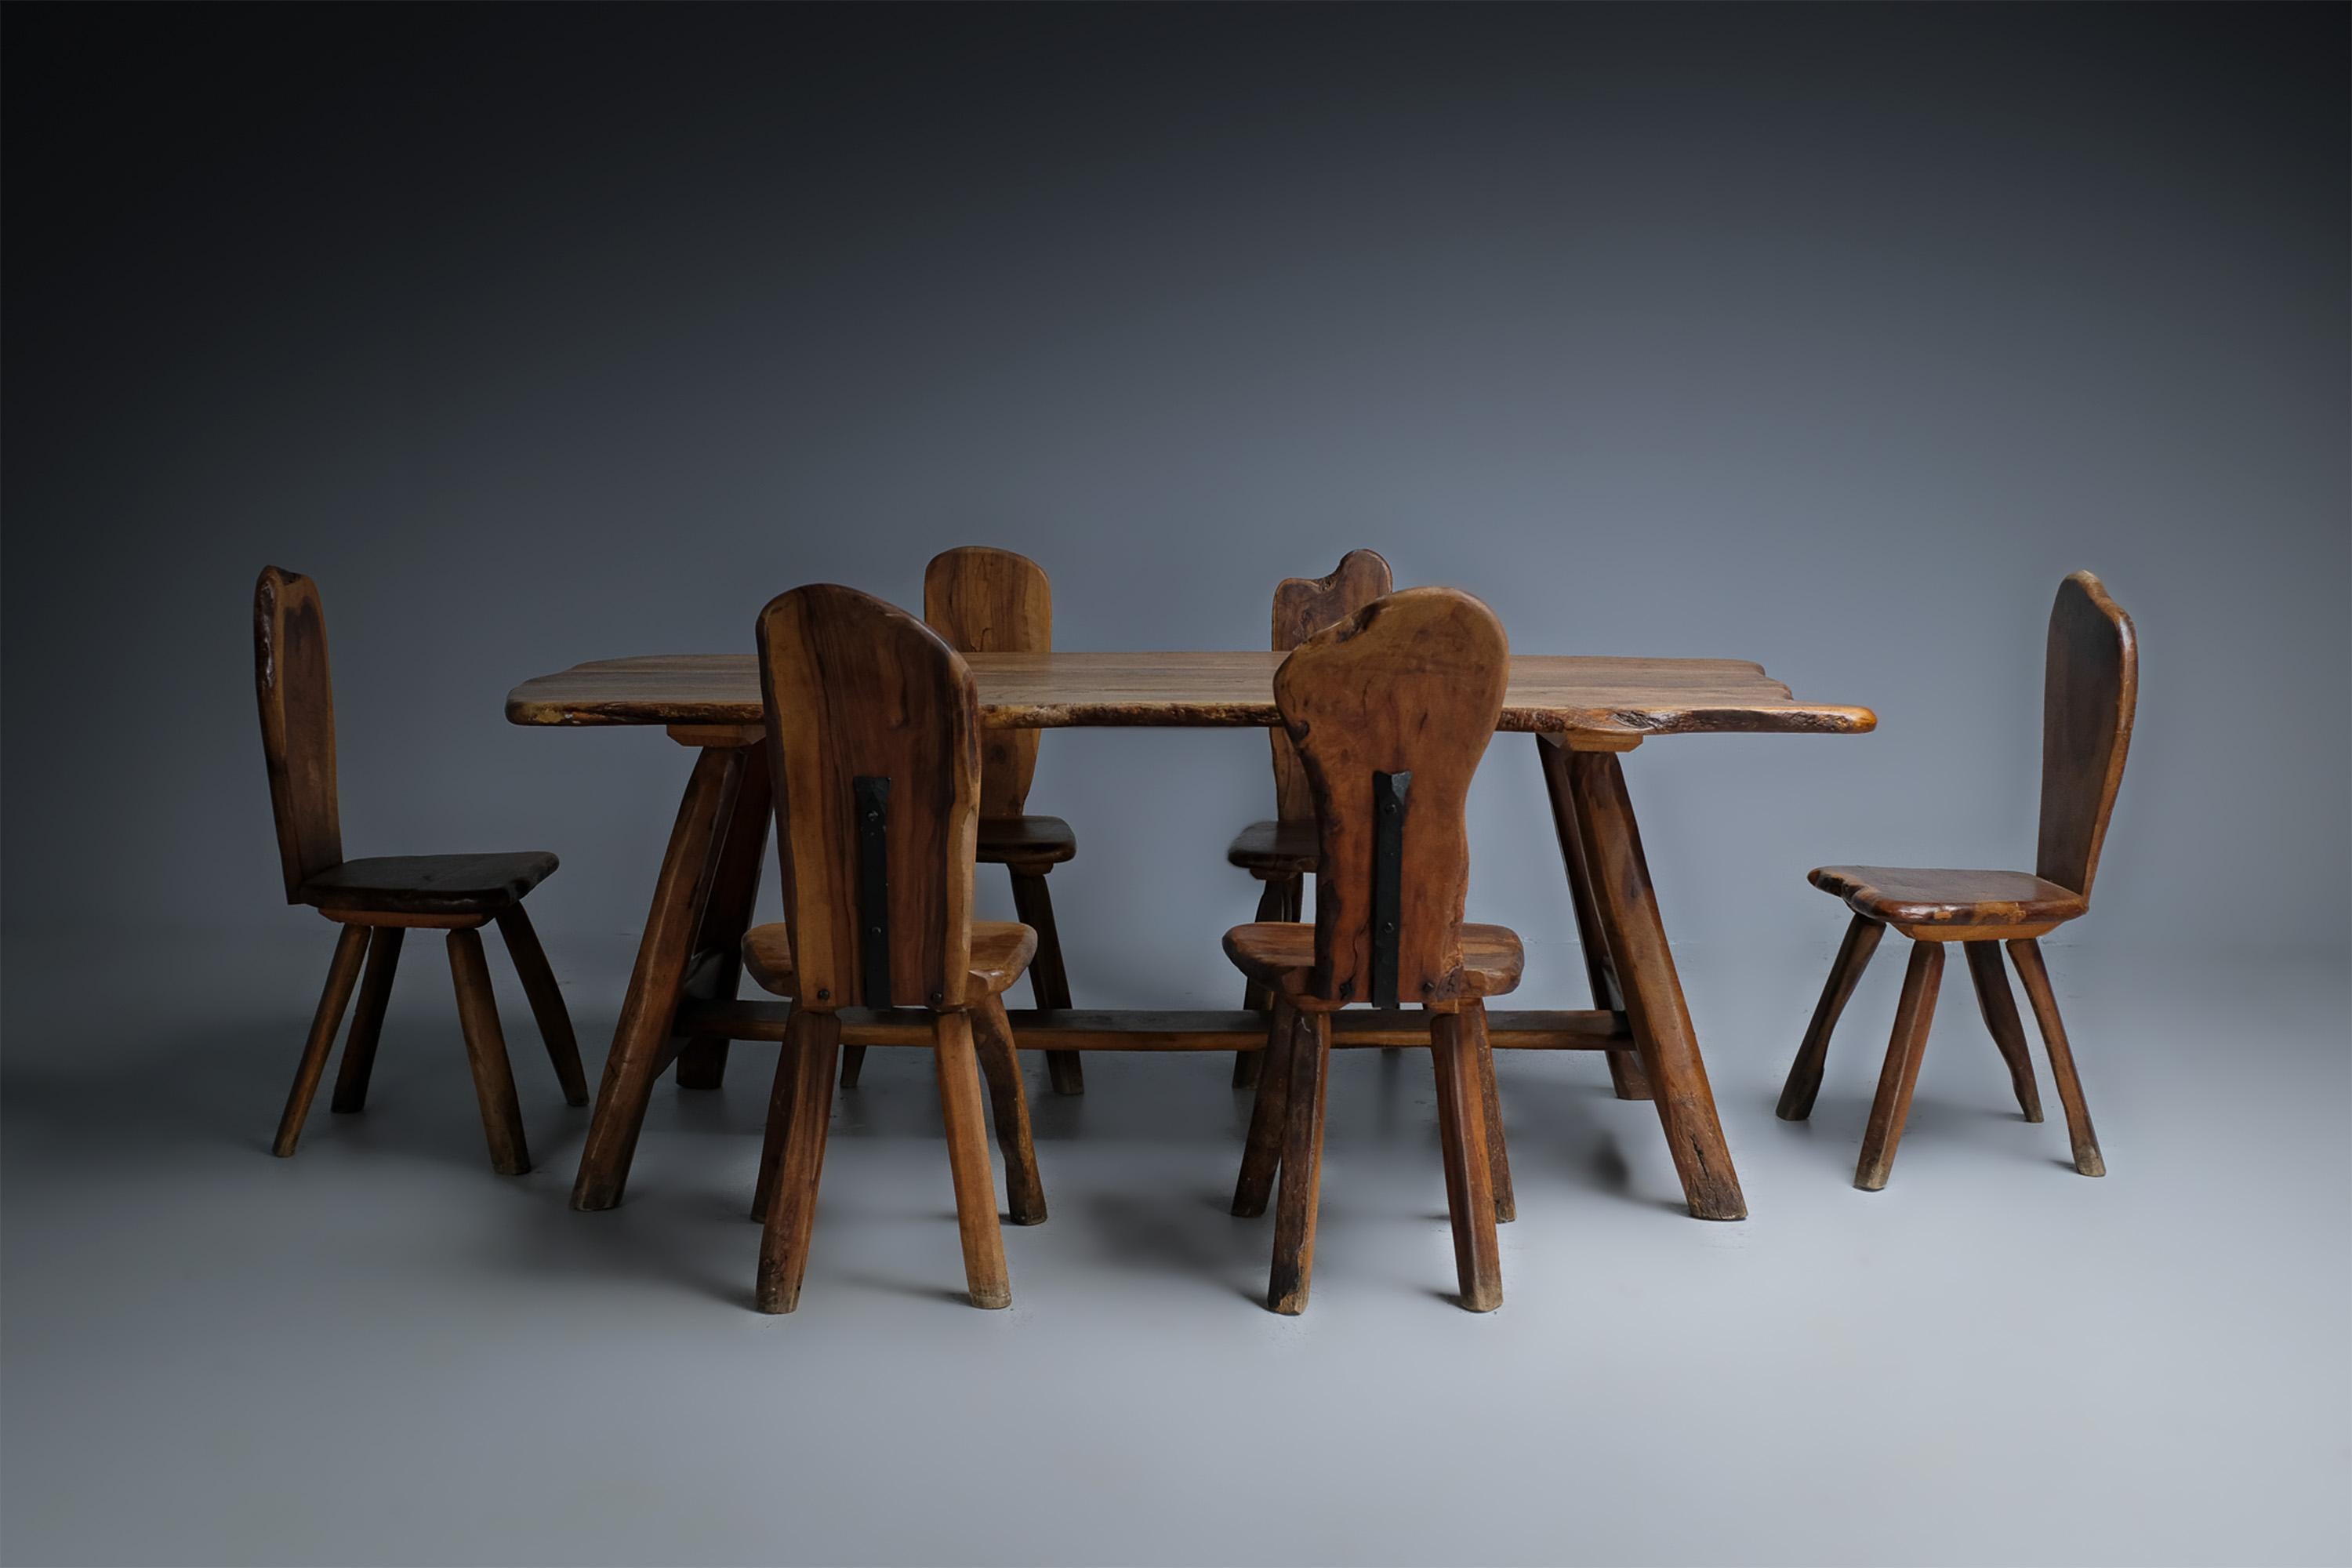 This dining room, made in the 1960s, is a true representative of France's rustic brutalist movement of the post-war period.

It is a set of six chairs made of olive wood that gathers around a table made of the same material. The wood is